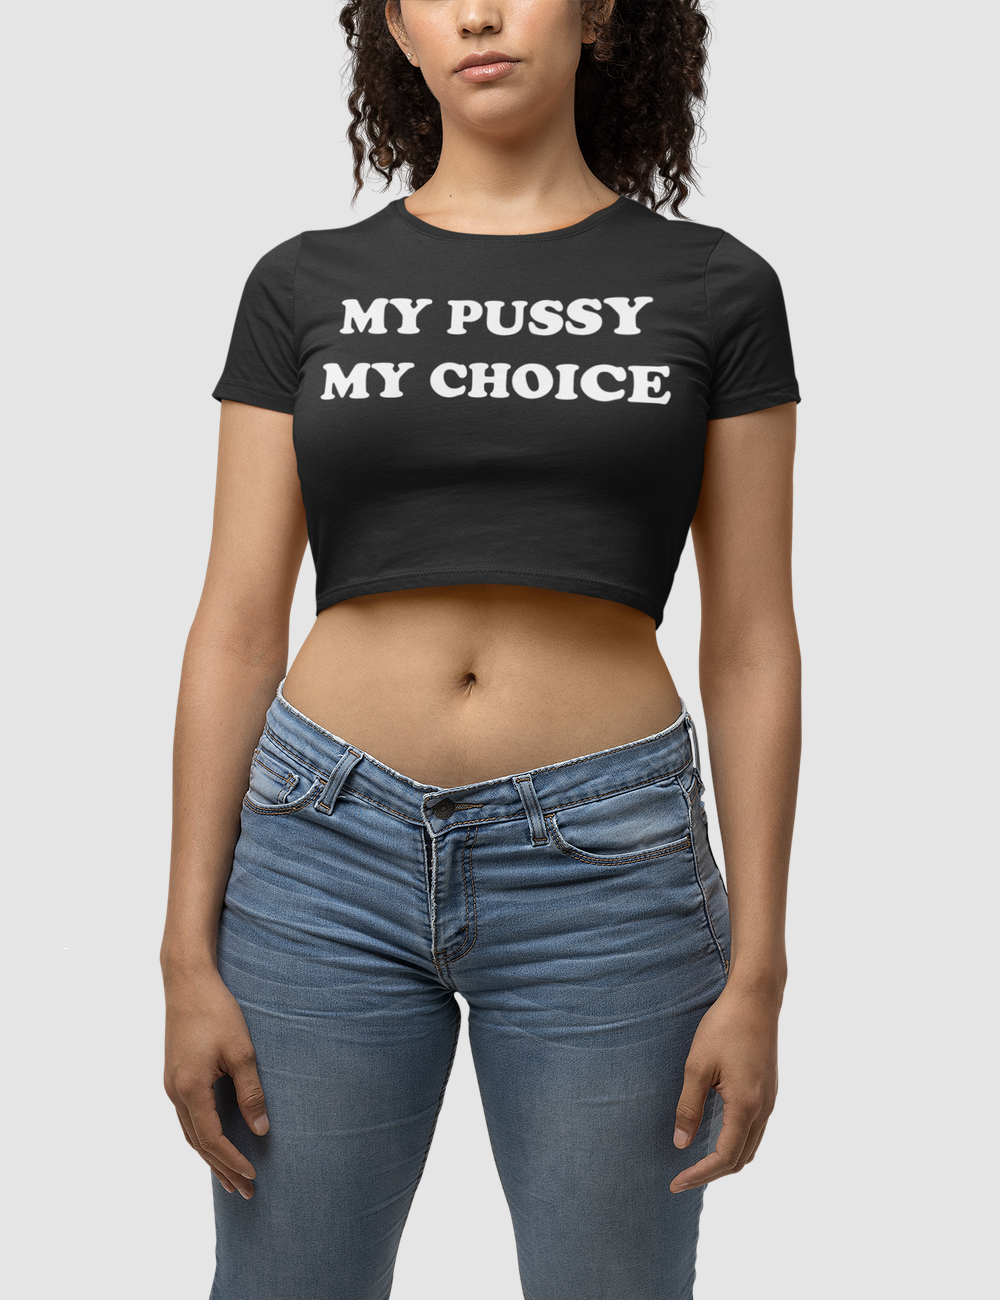 My Pussy My Choice | Women's Fitted Crop Top T-Shirt OniTakai